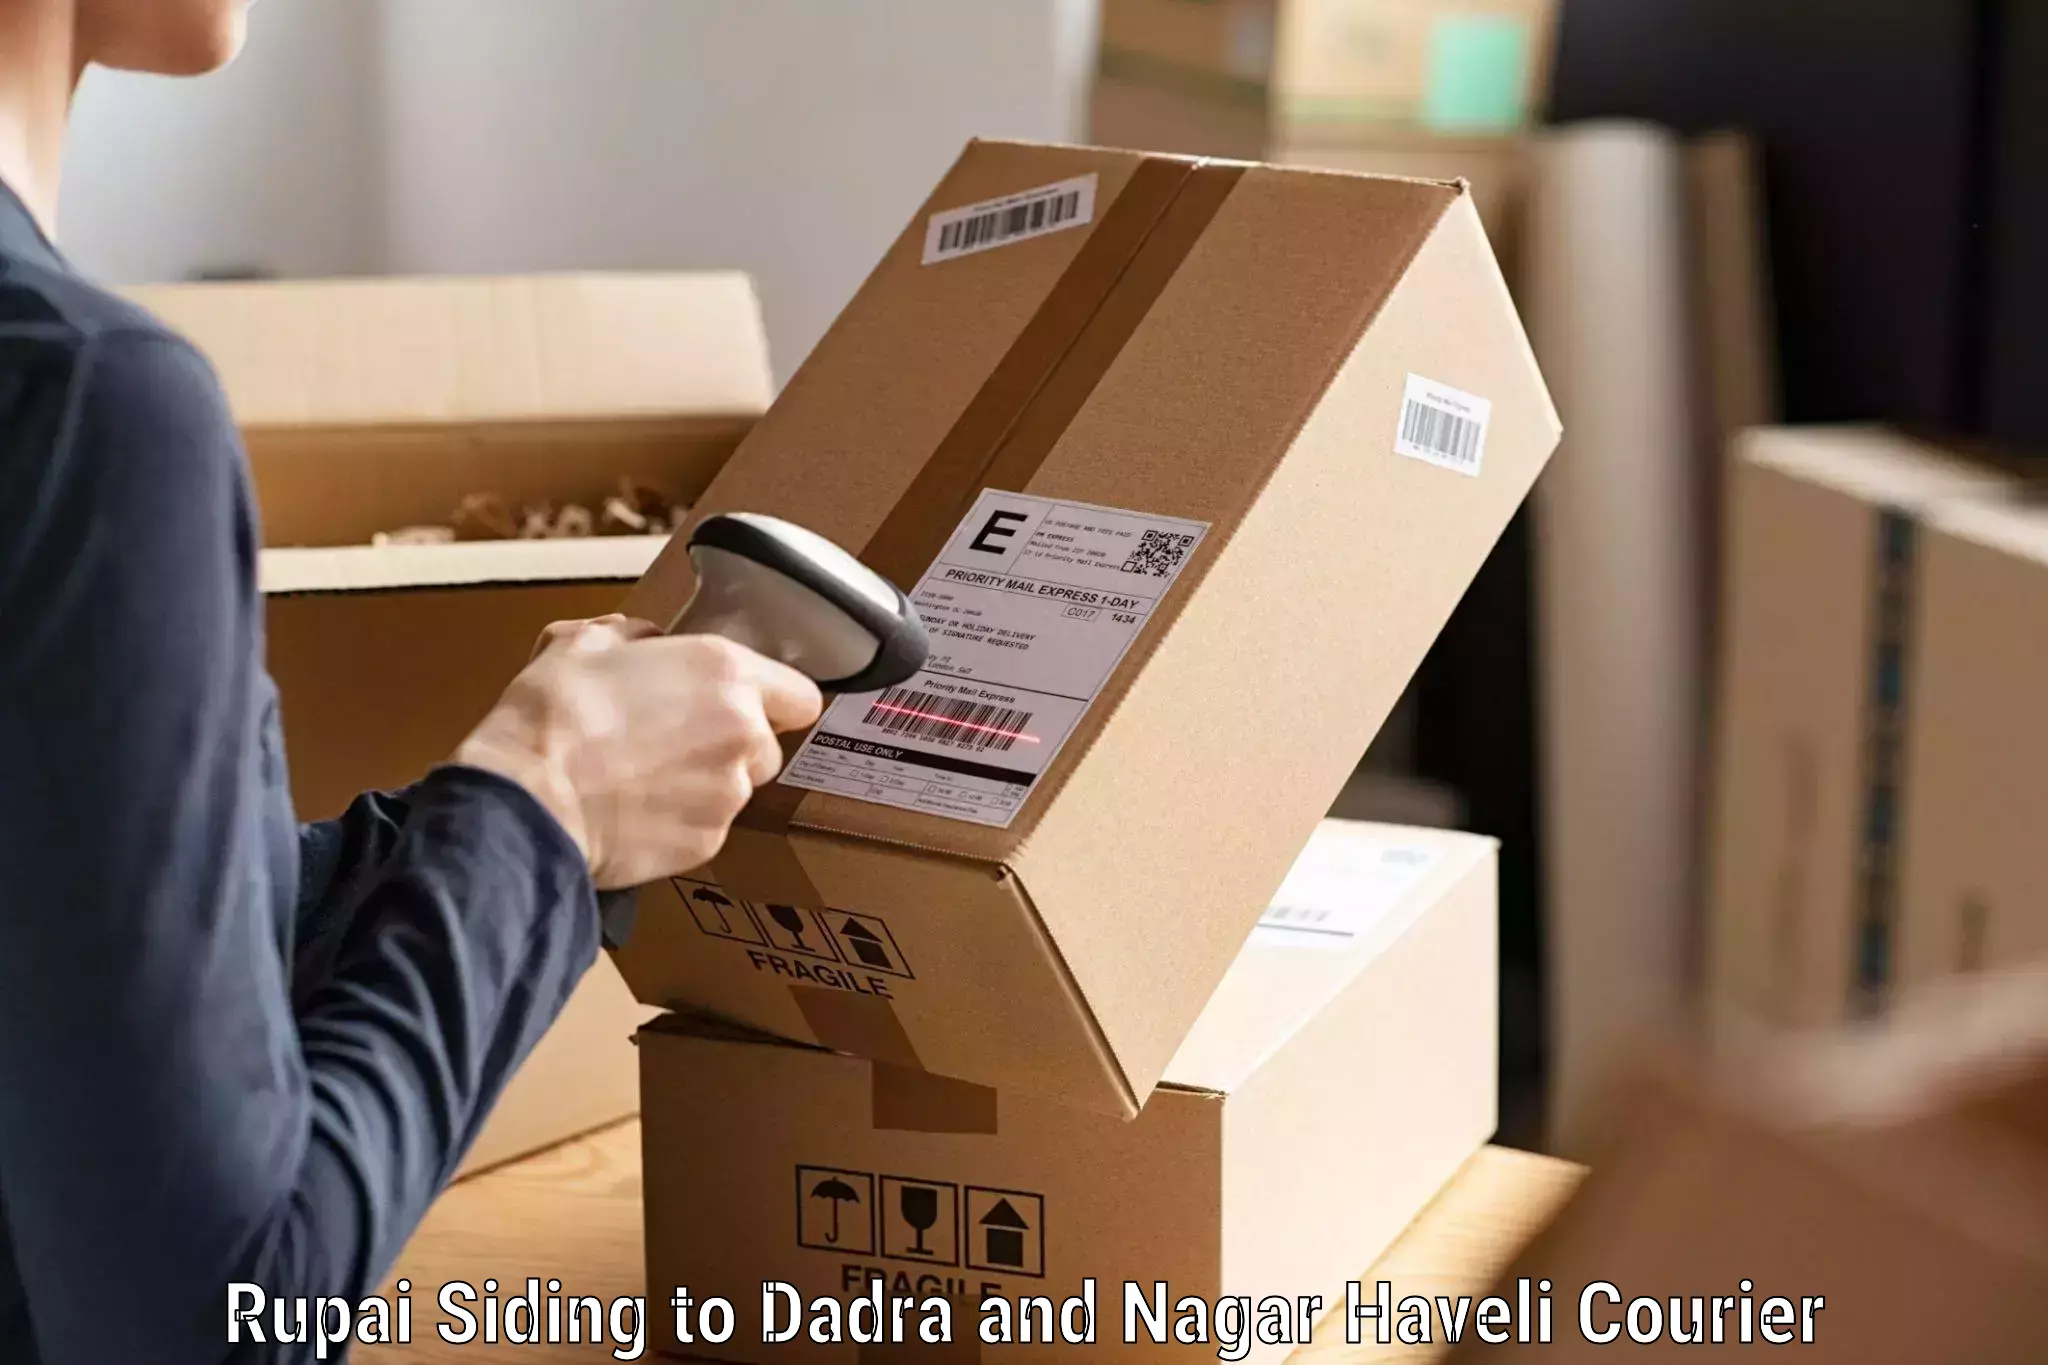 Parcel service for businesses in Rupai Siding to Dadra and Nagar Haveli